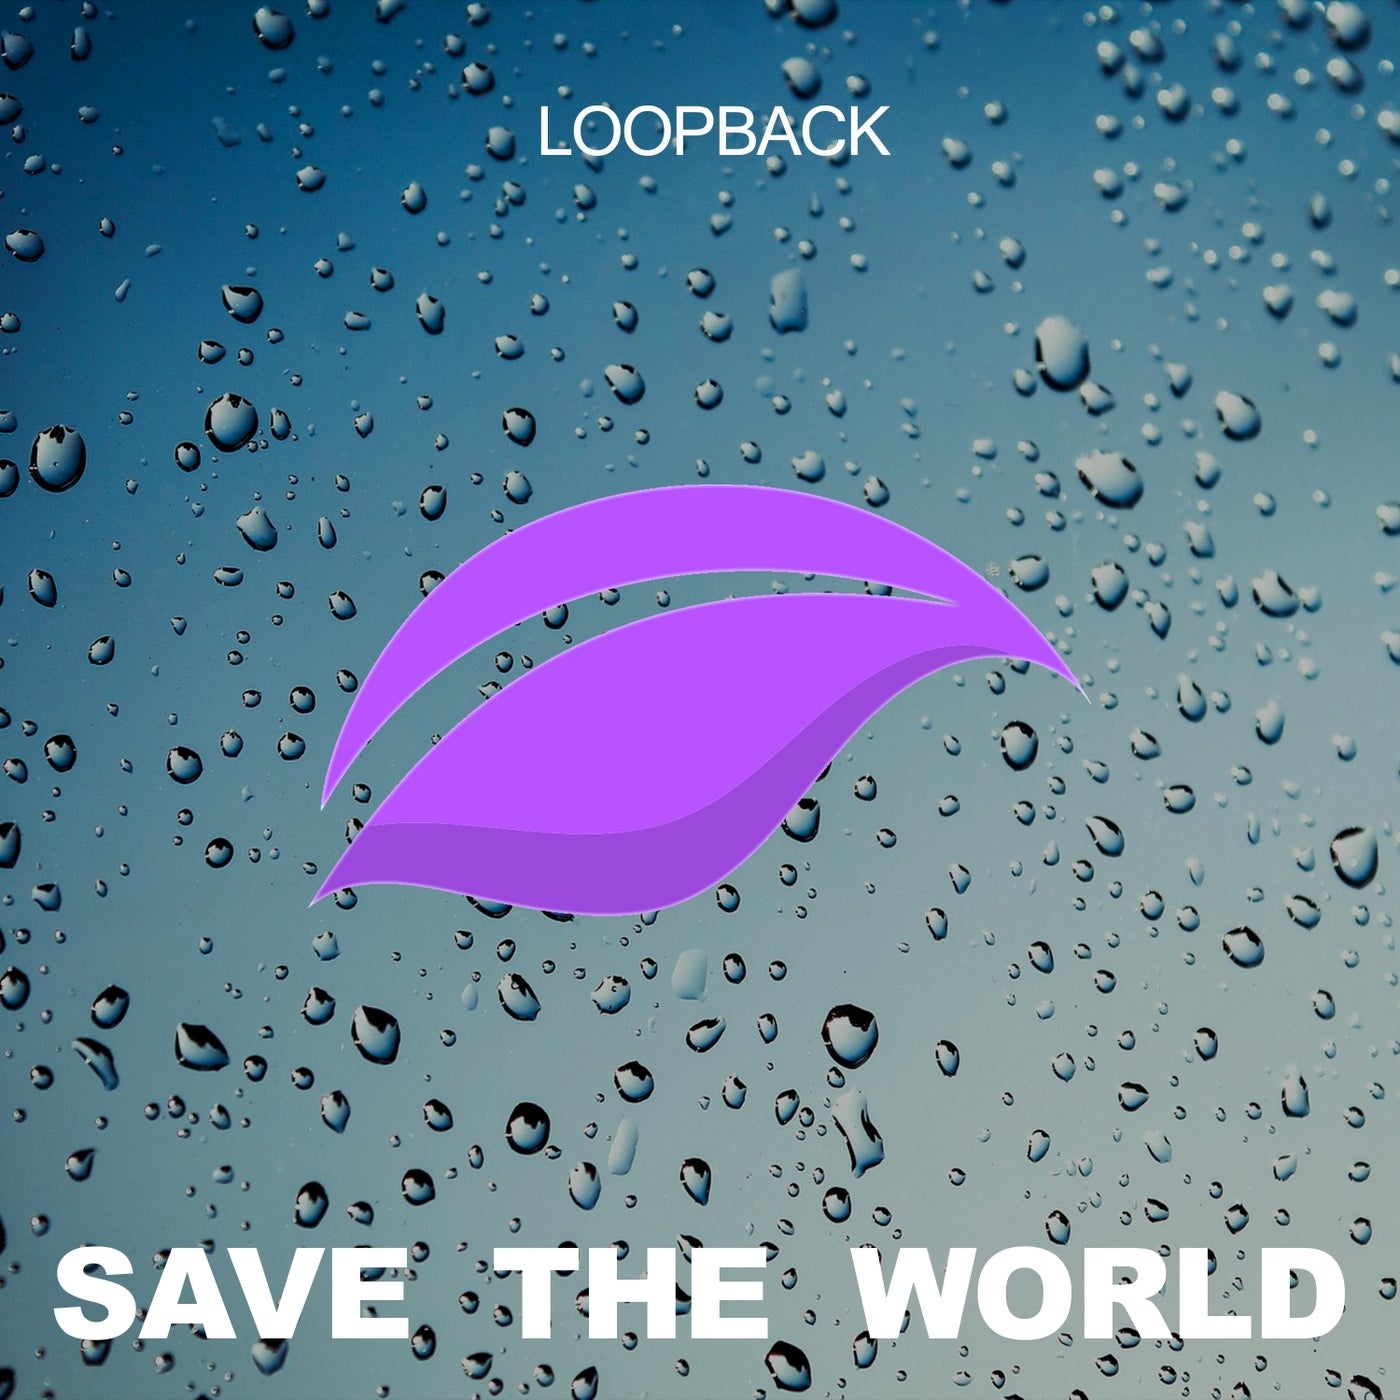 A.I.G., Bass Chef - Loopback [Save The World]